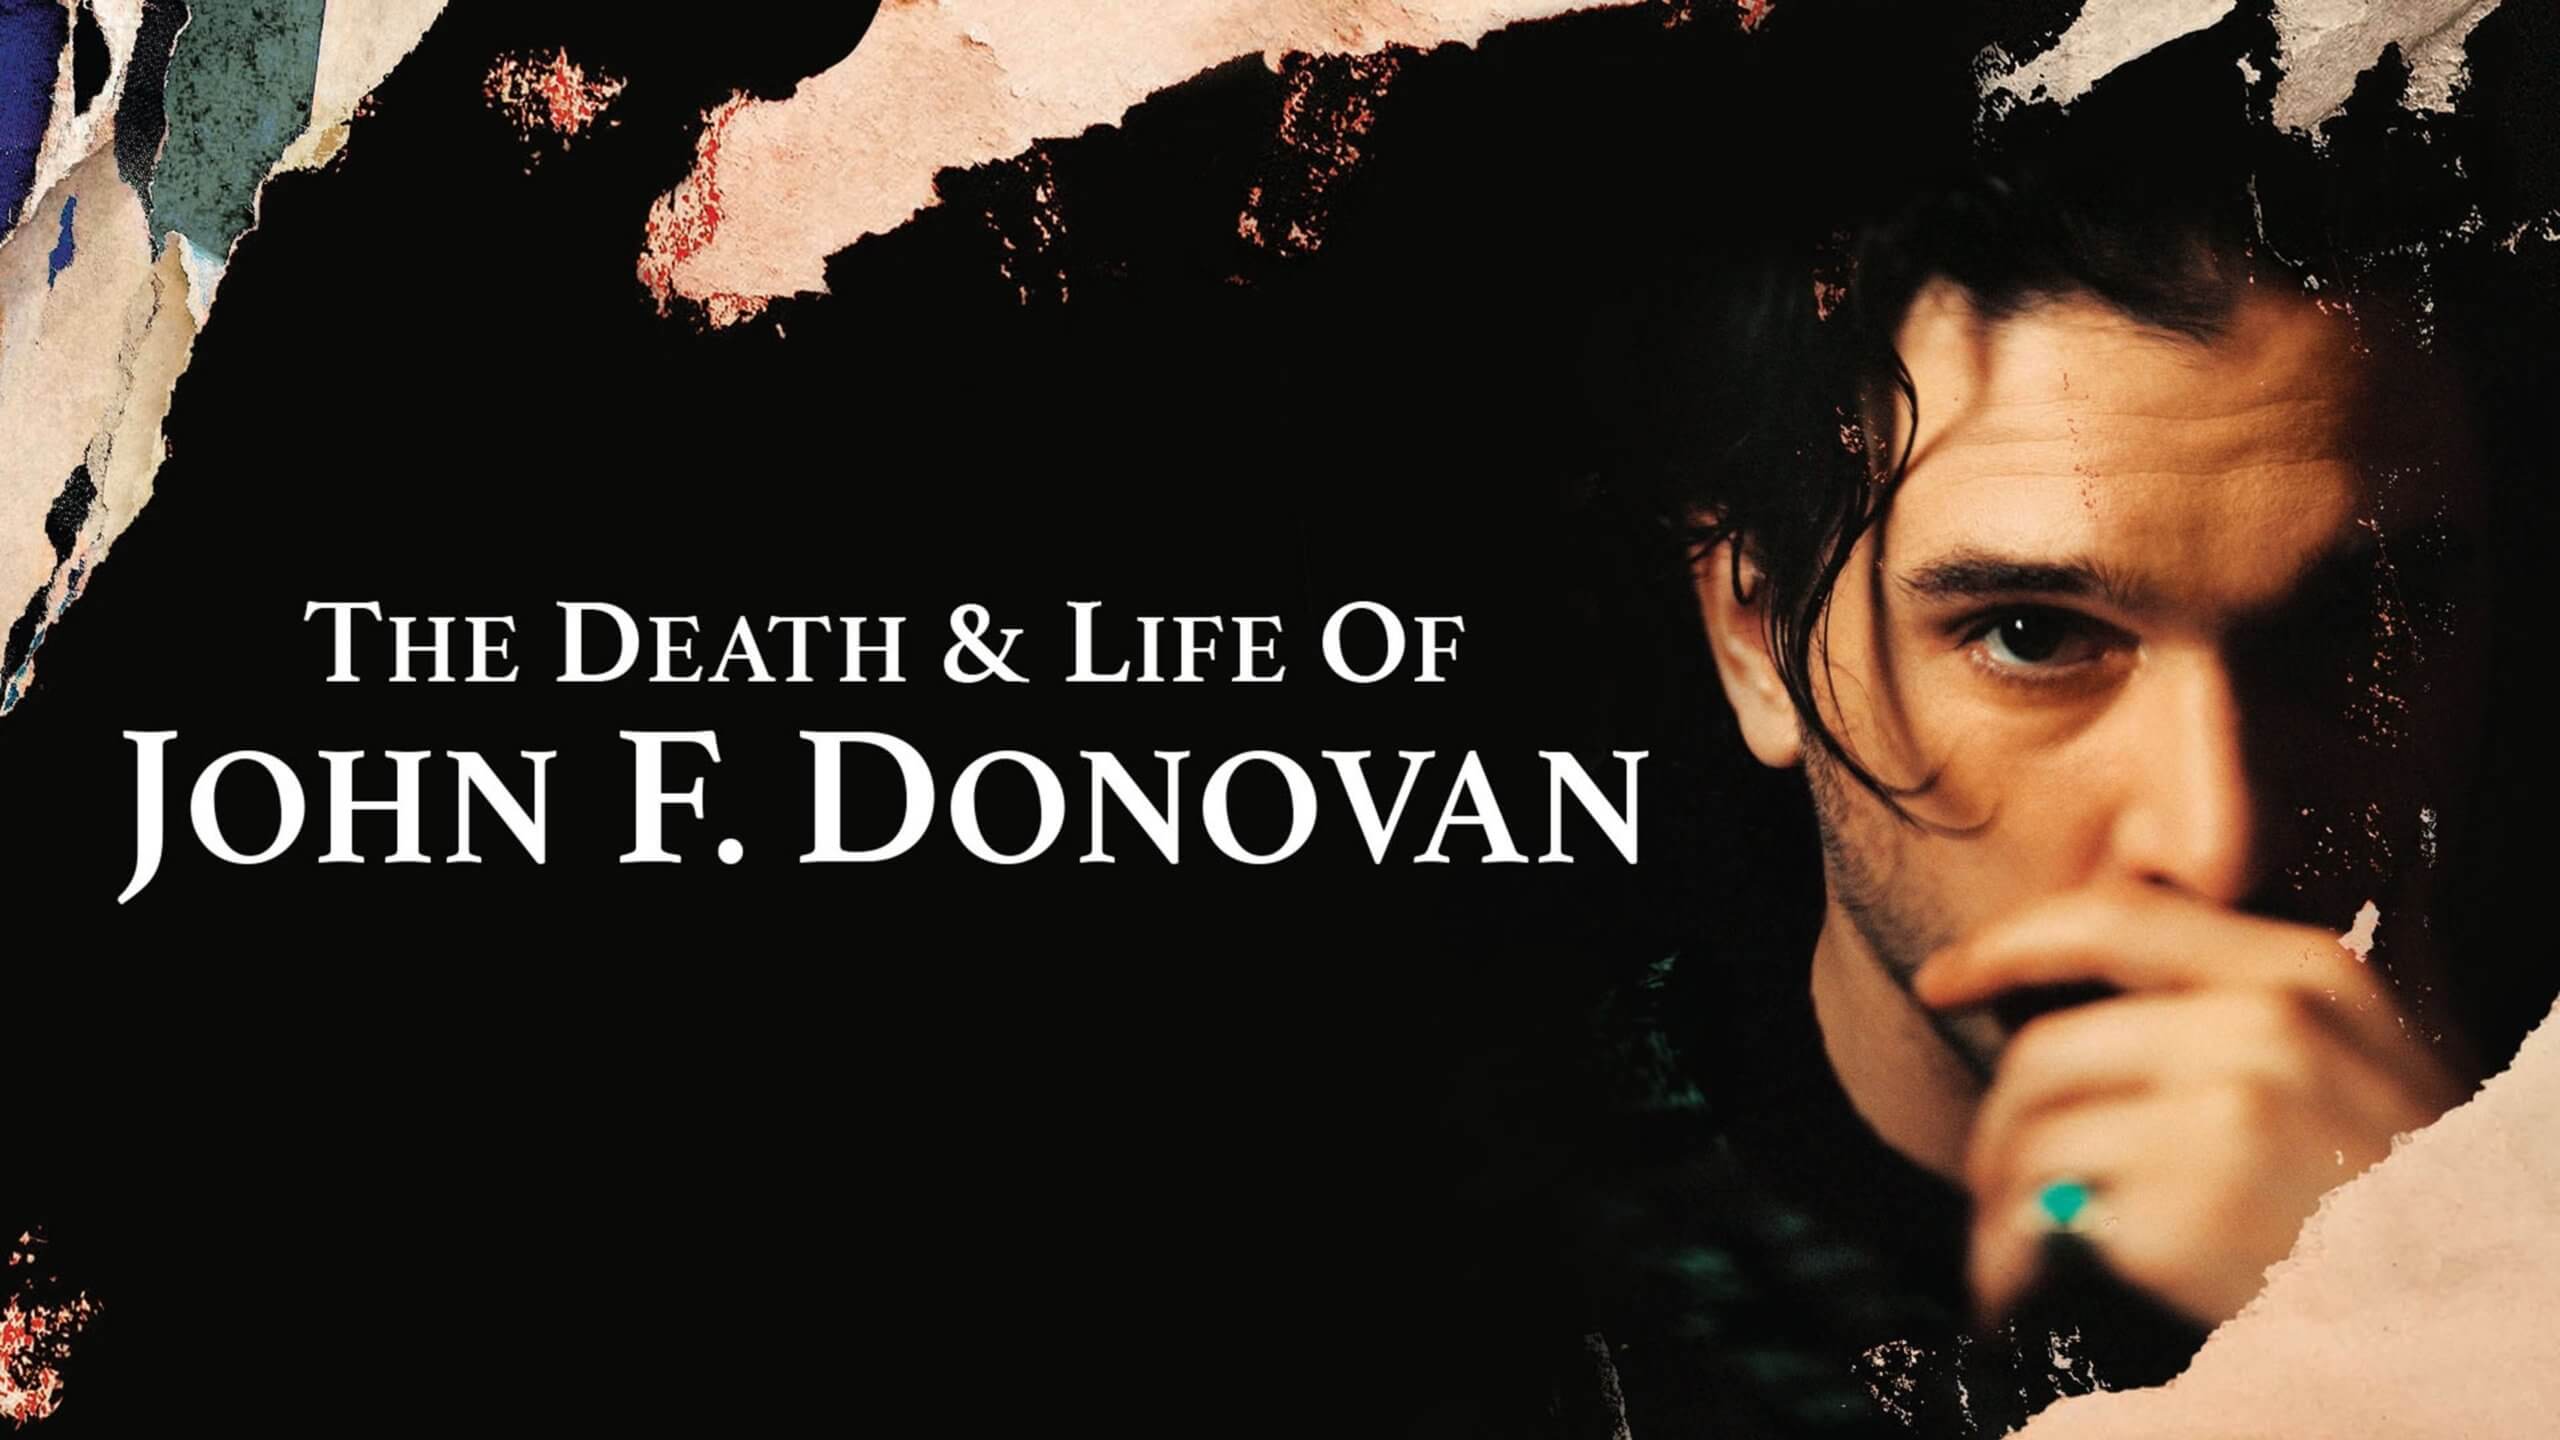 the death and life of john f. donovan movie